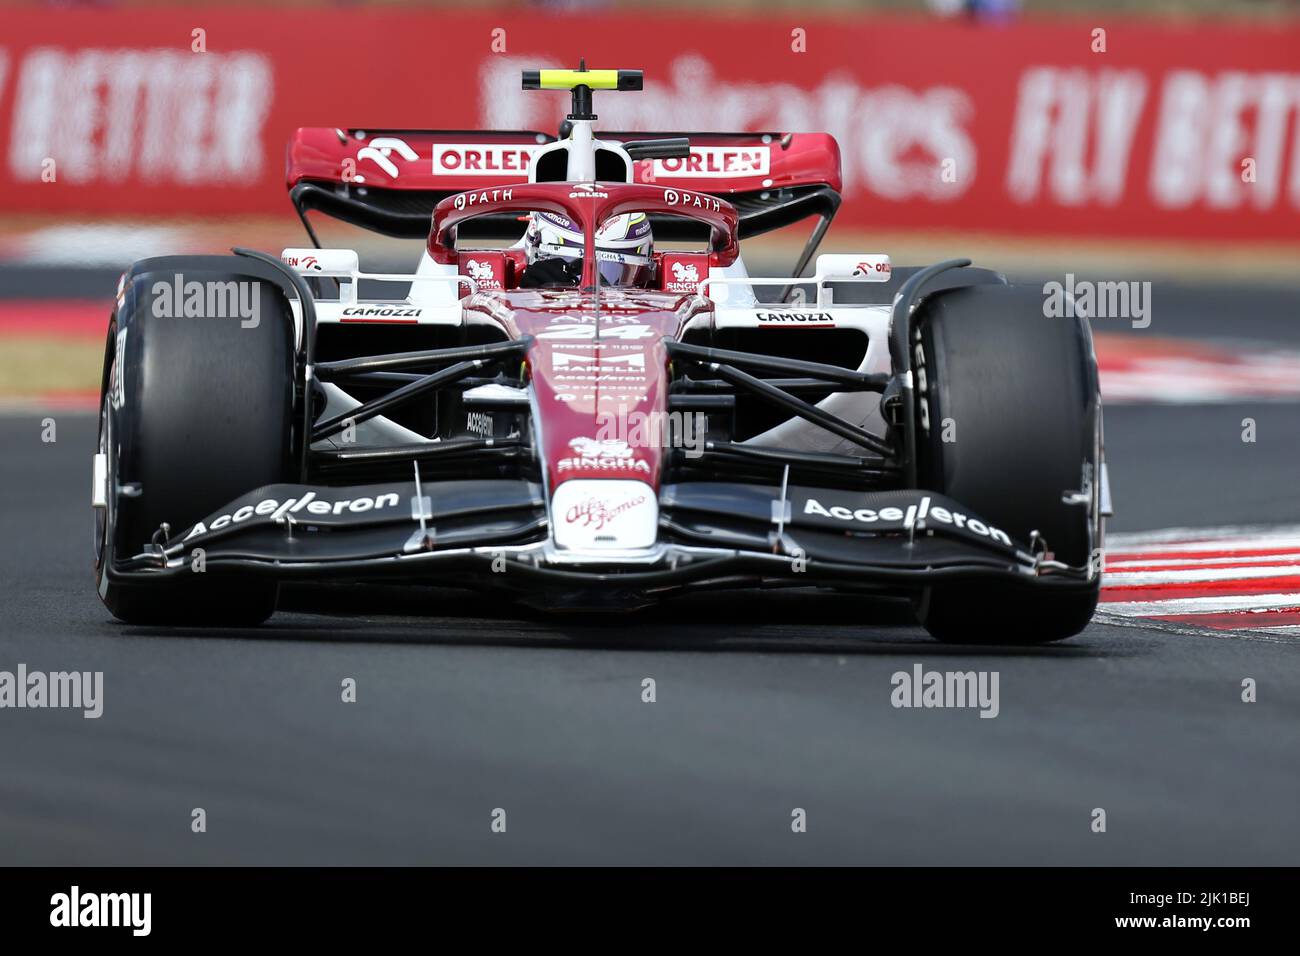 Guanyu Zhou of Alfa Romeo F1 Team on track during free practice 1 ahead of the F1 Grand Prix of Hungary Stock Photo